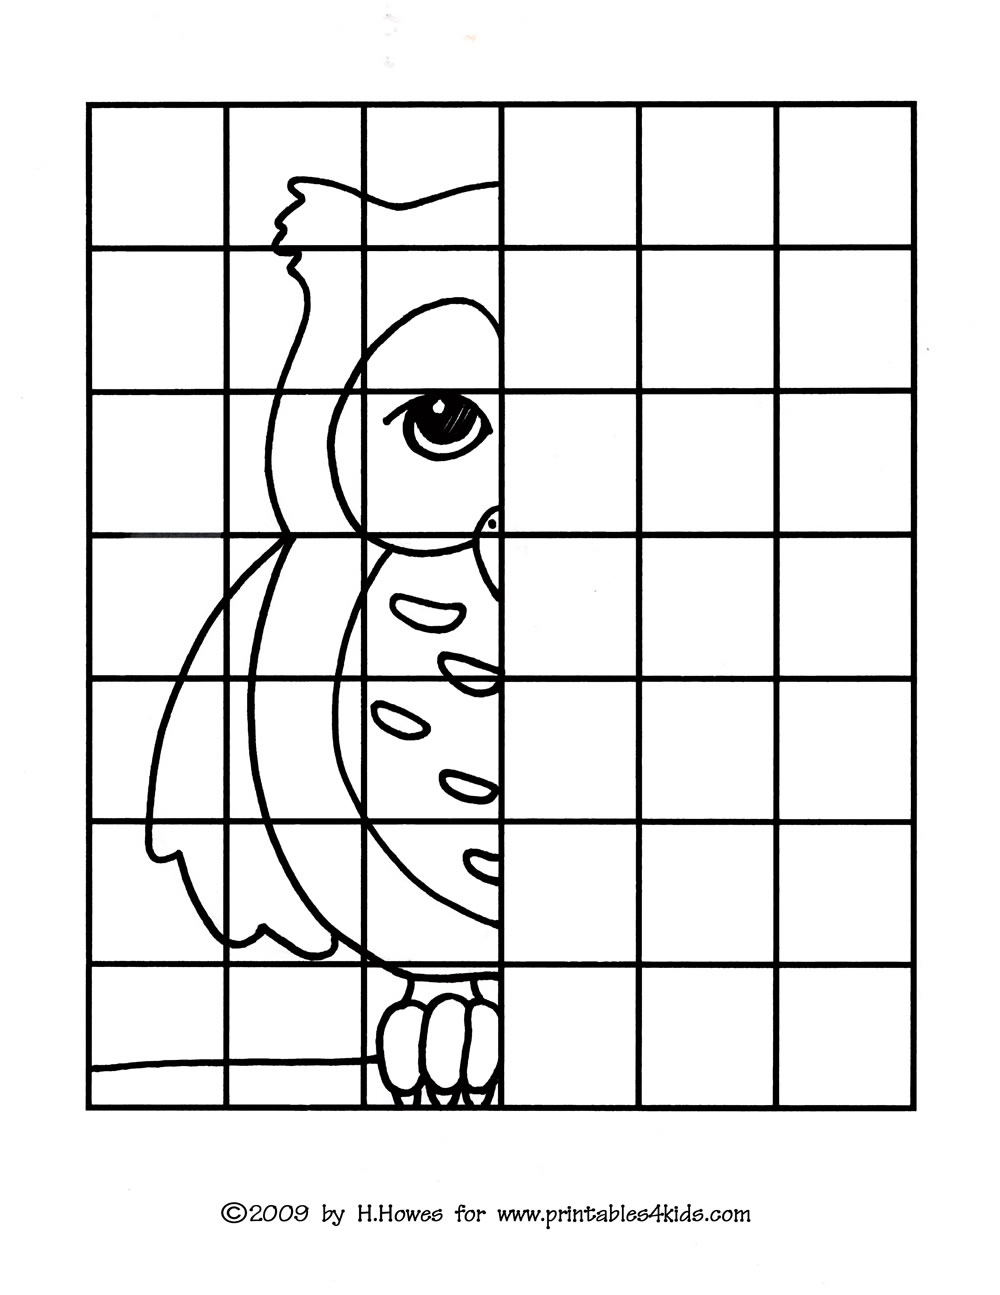 easy-grid-drawing-worksheets-at-paintingvalley-explore-collection